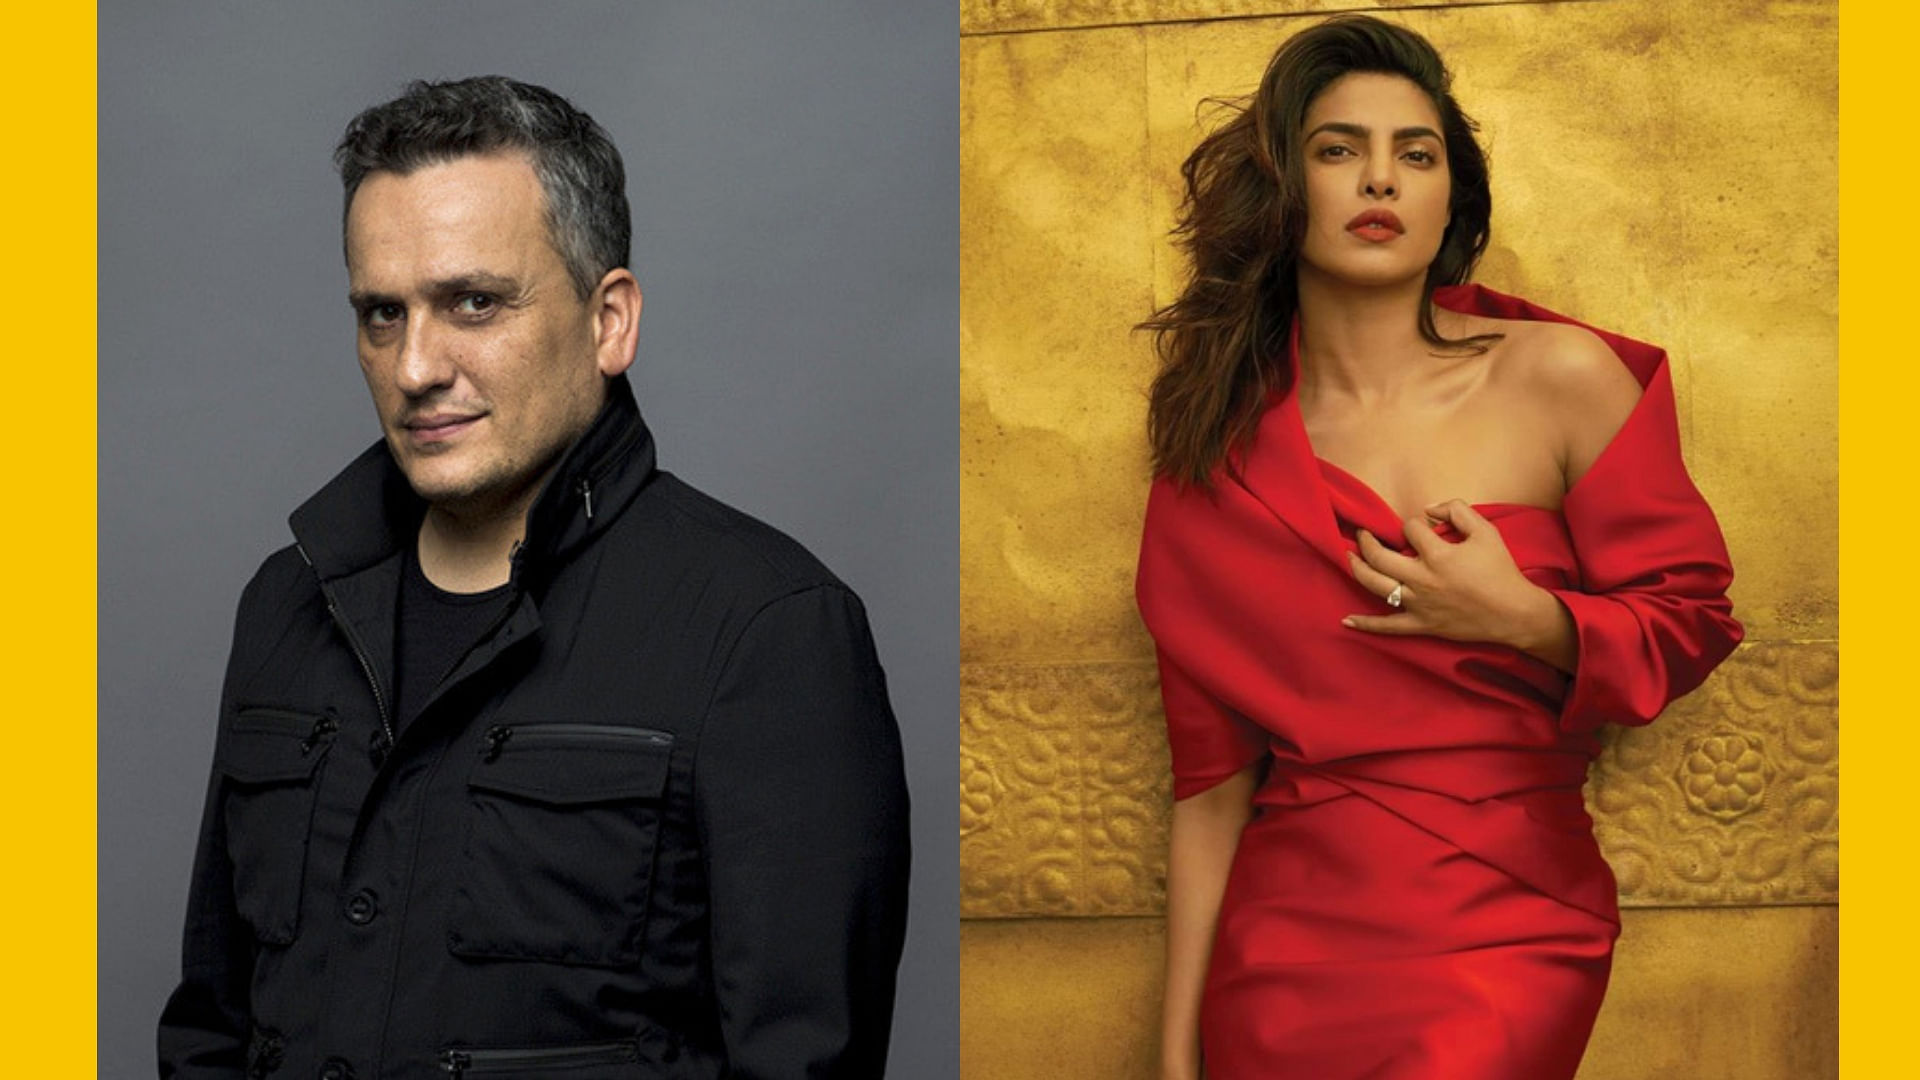 Joe Russo confirms they are in talks with Priyanka Chopra for a project.